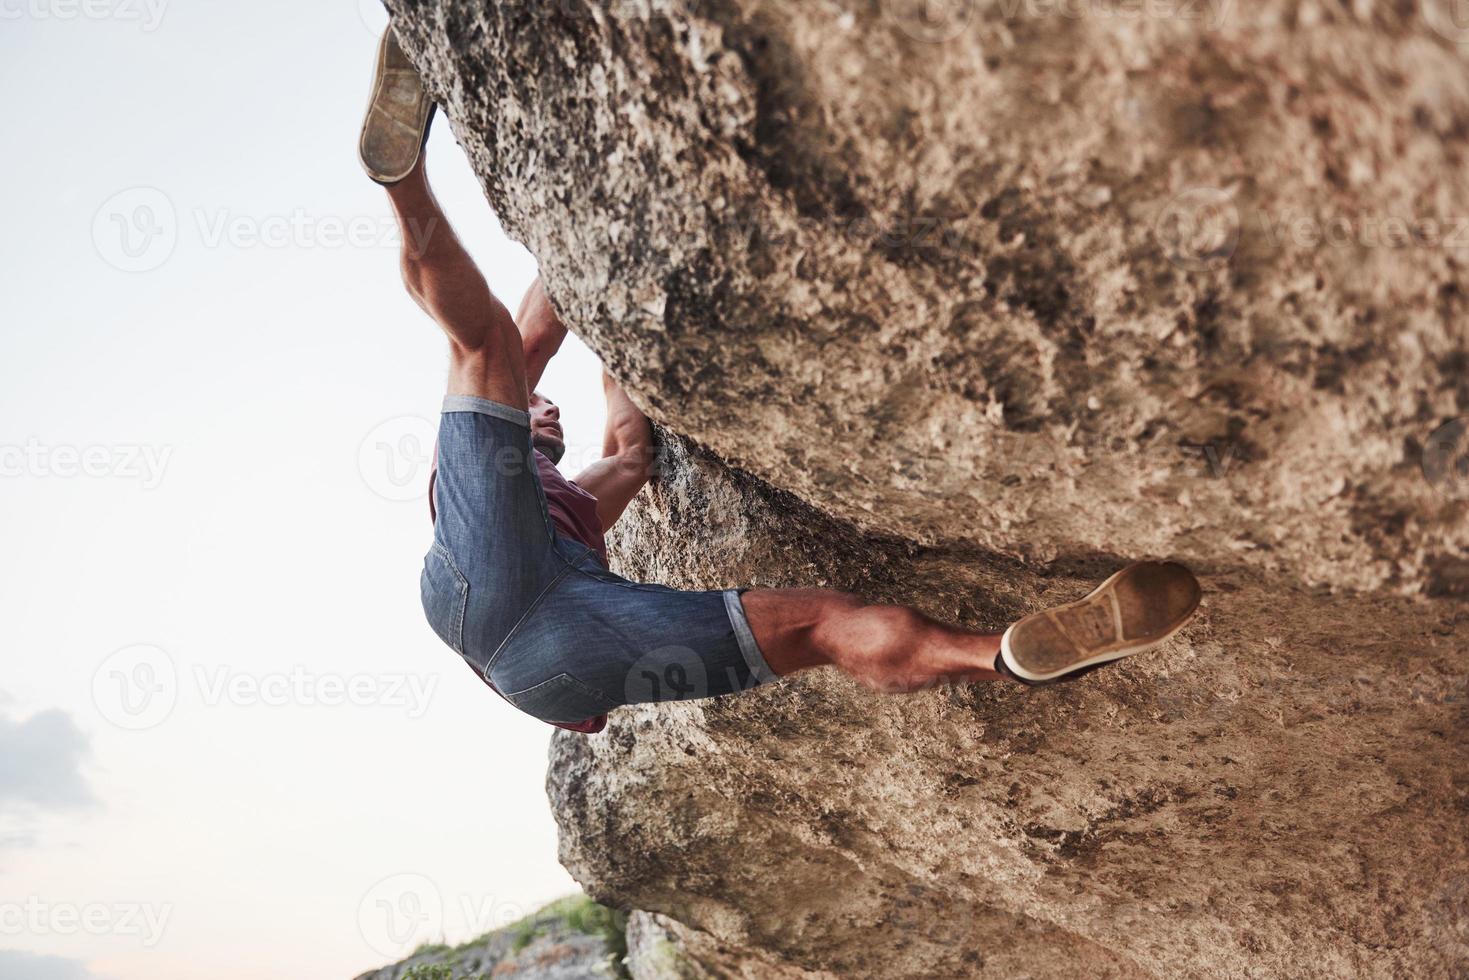 A young man climbers climb a rock. Extreme rest, style of life free and strong in spirit people photo